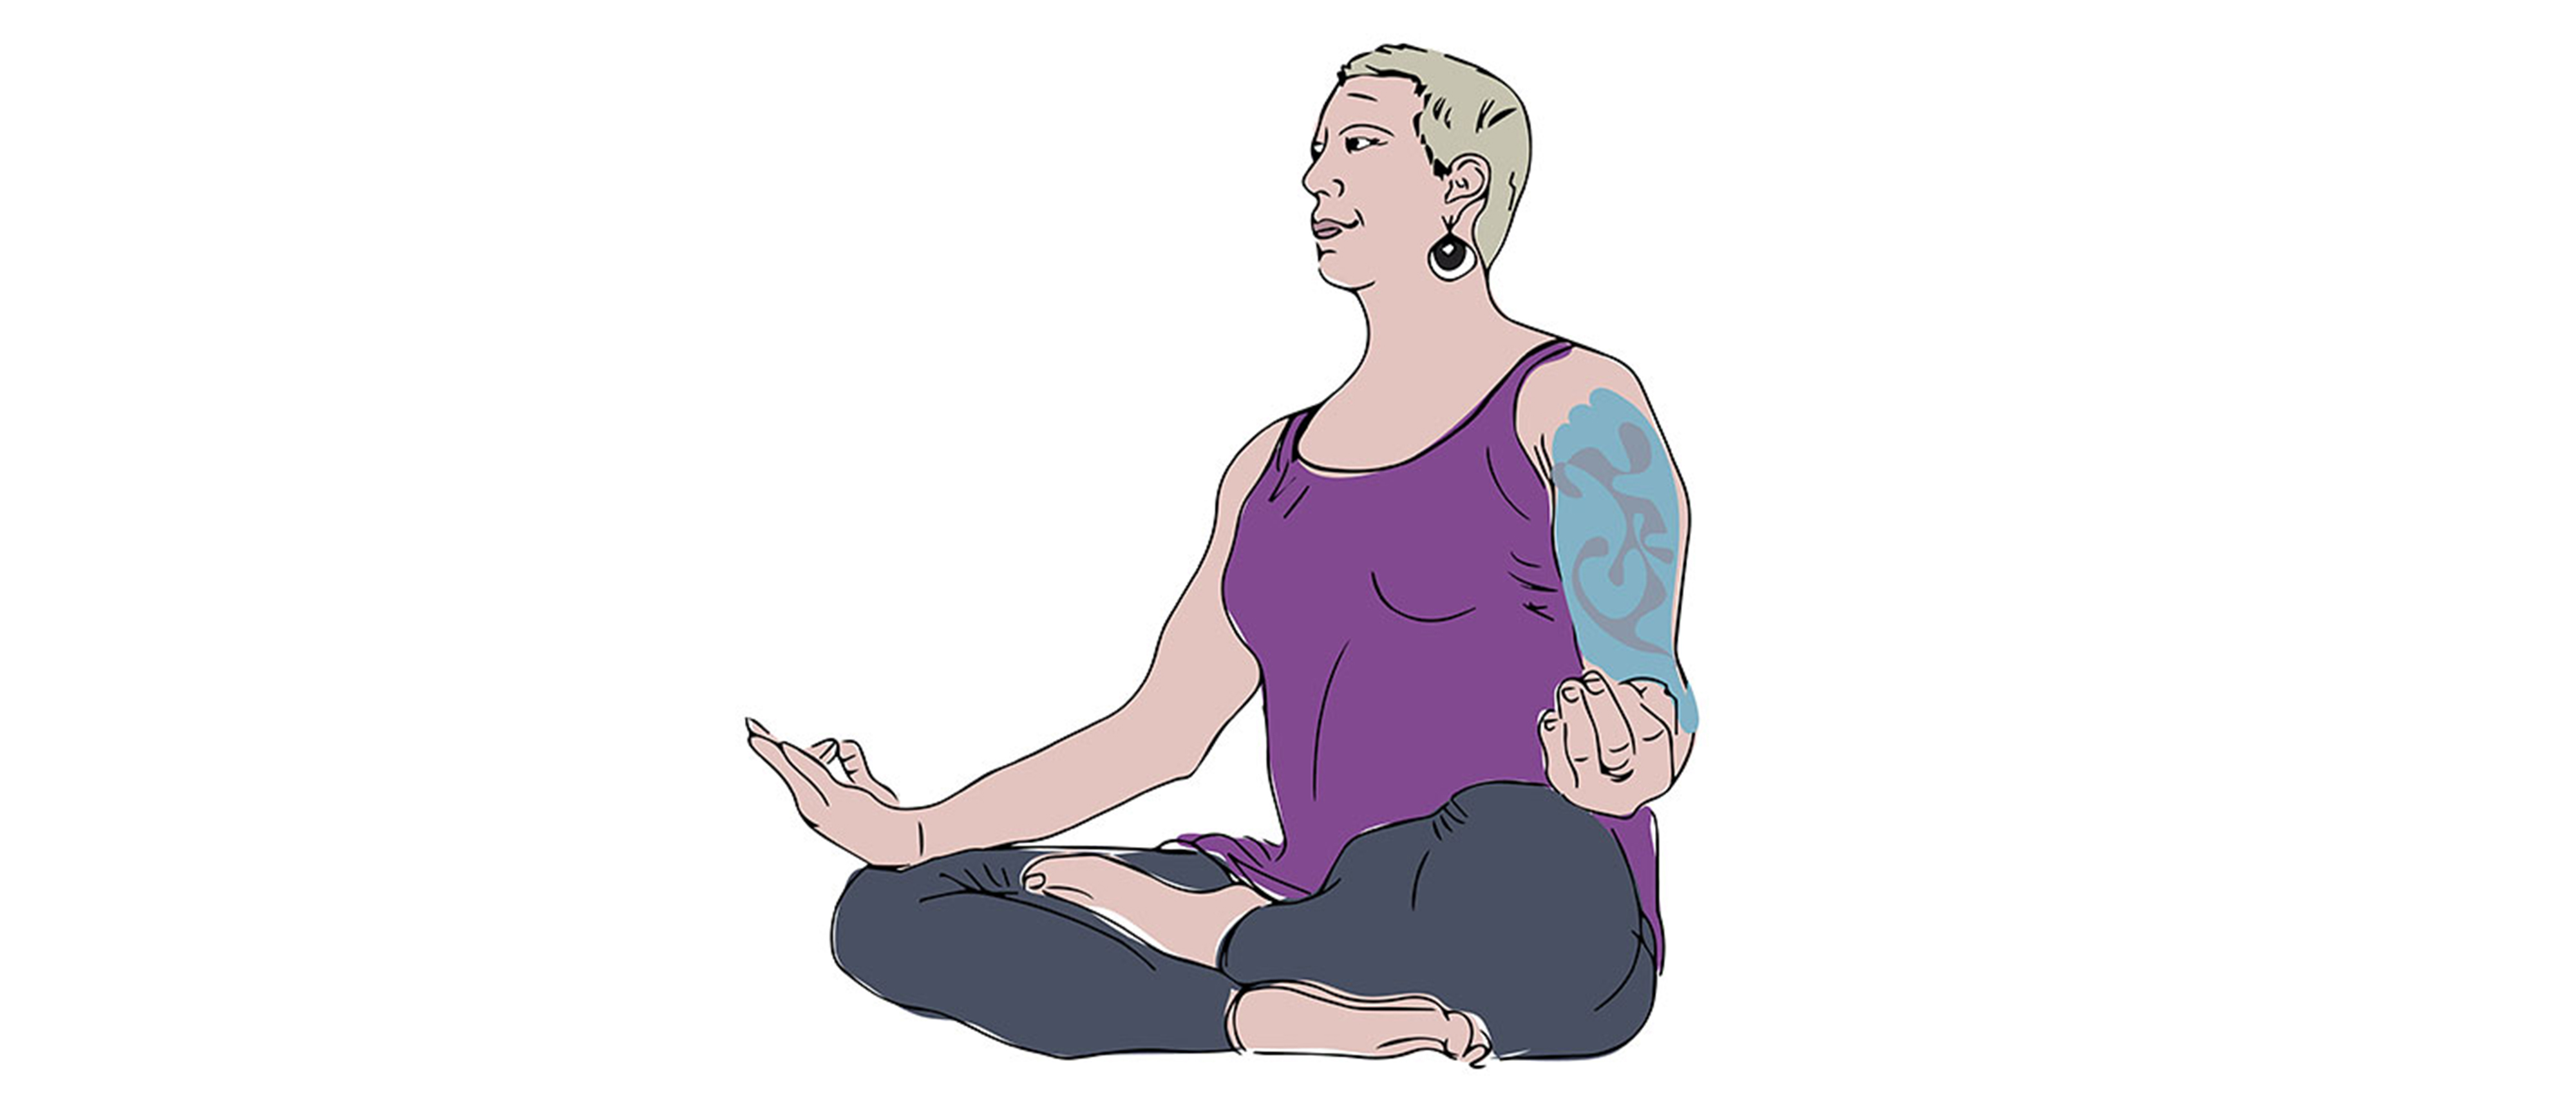 Illustrated Portrait of person meditating